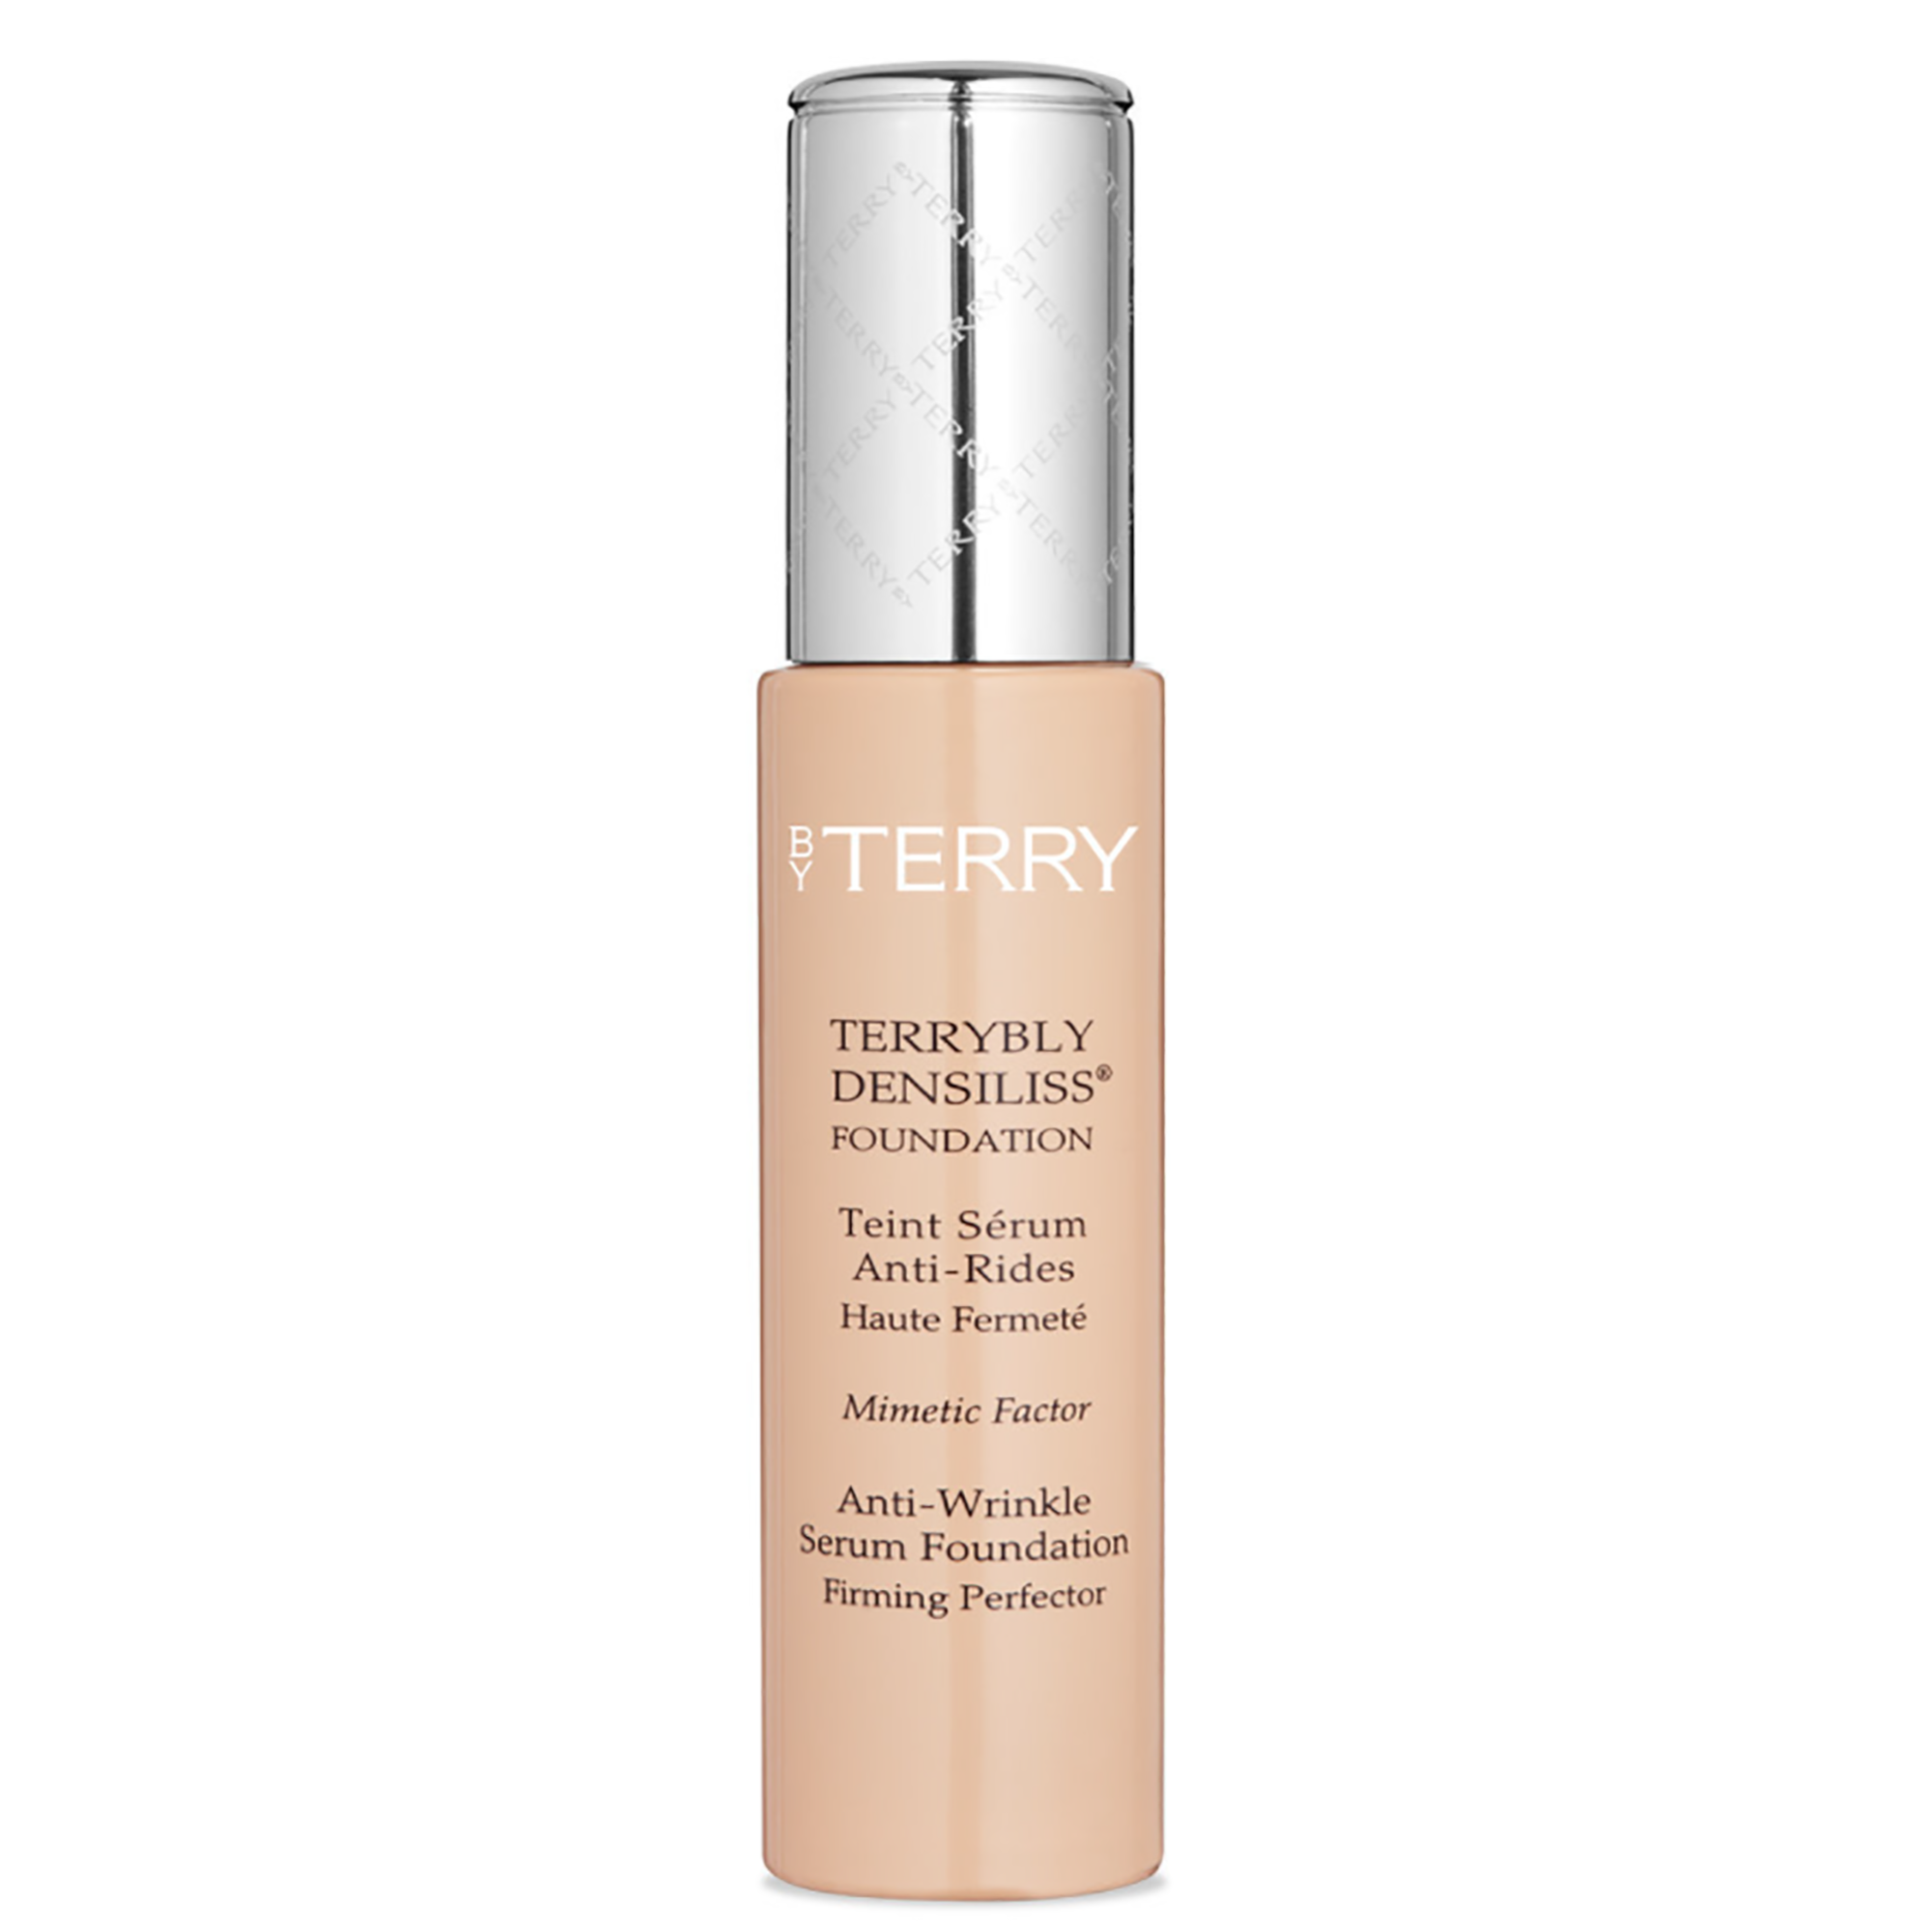 By Terry Terrybly Densiliss Anti-Wrinkle Serum Foundation #7.5 Honey Glow